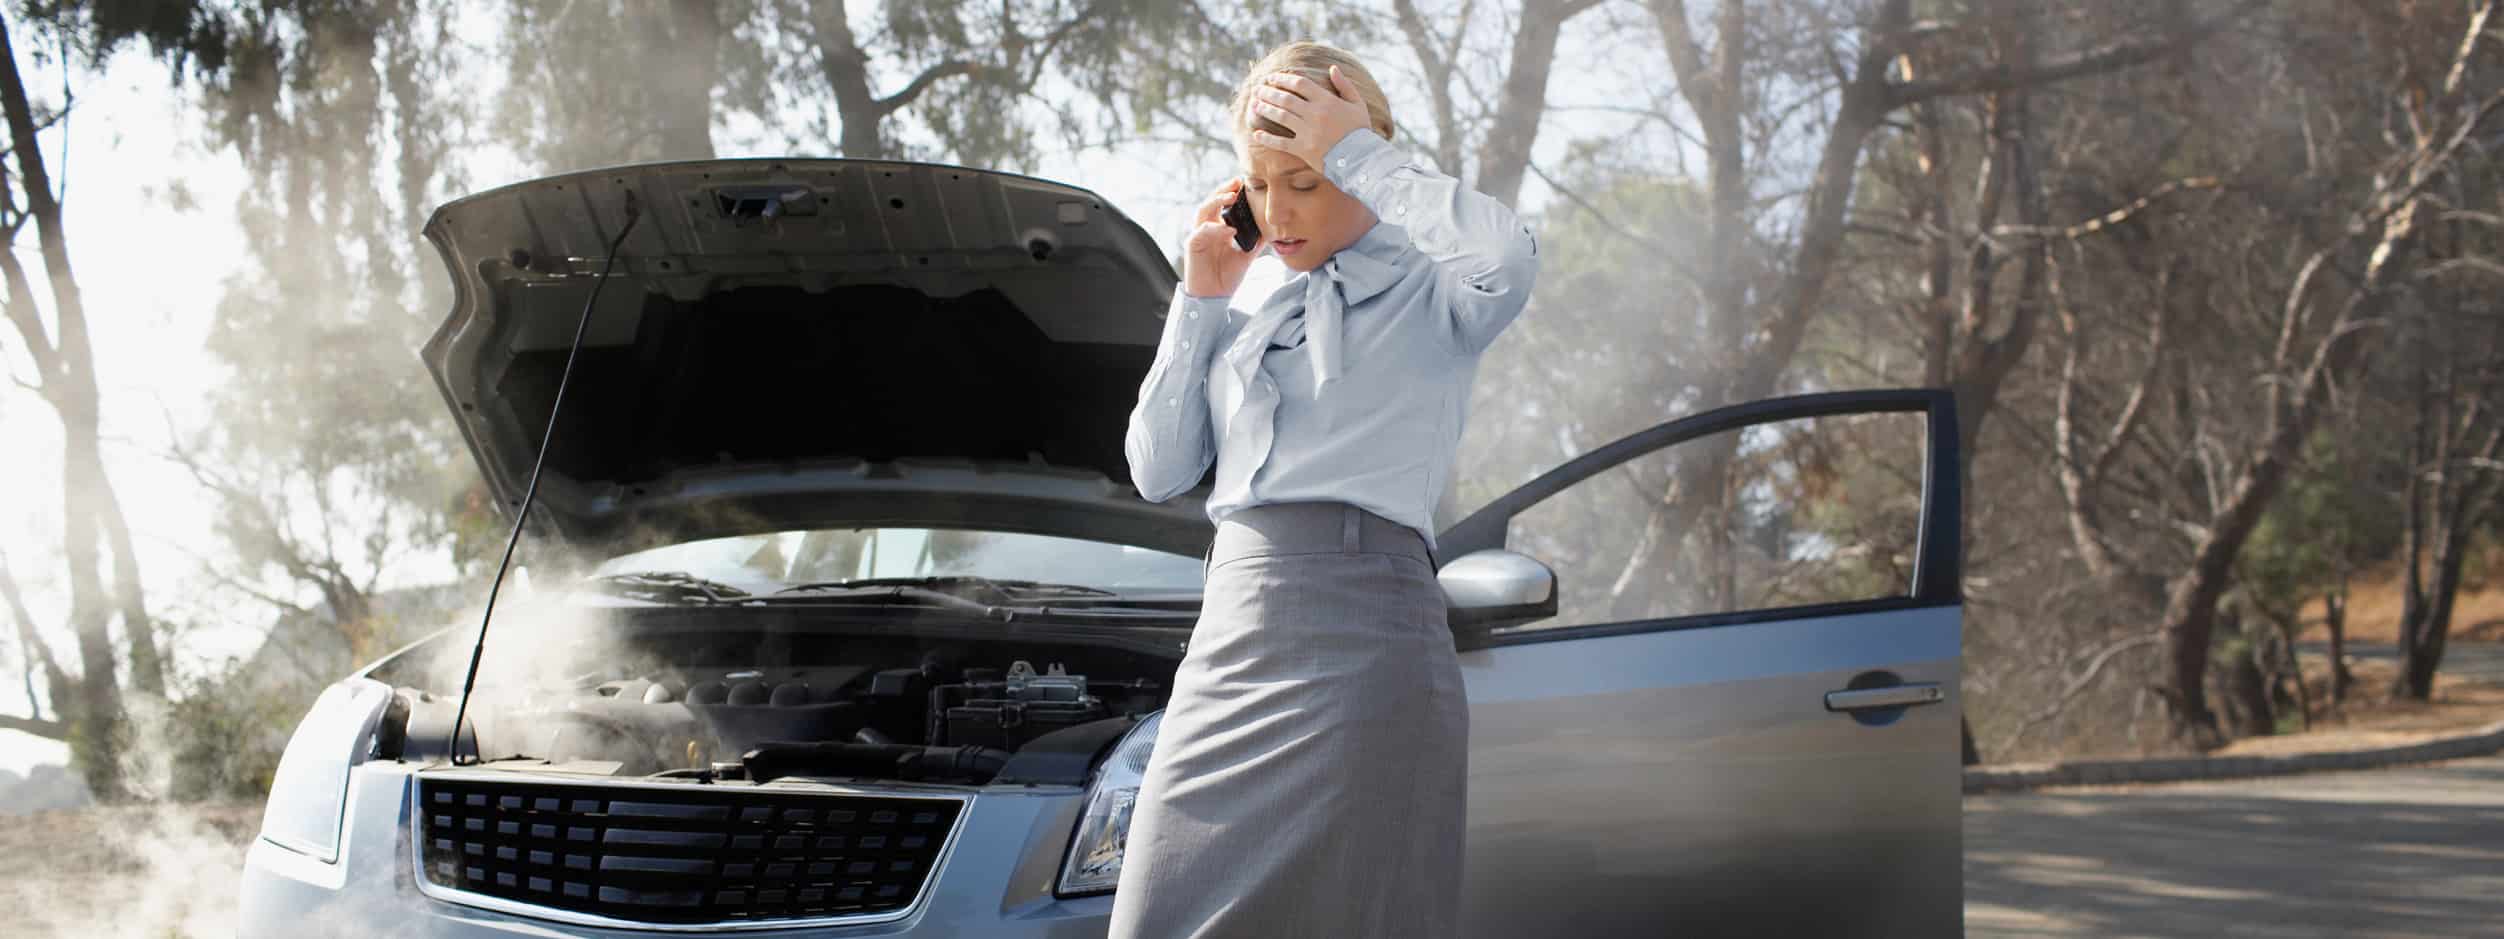 A woman stands in front of her overheating car while on the phone.